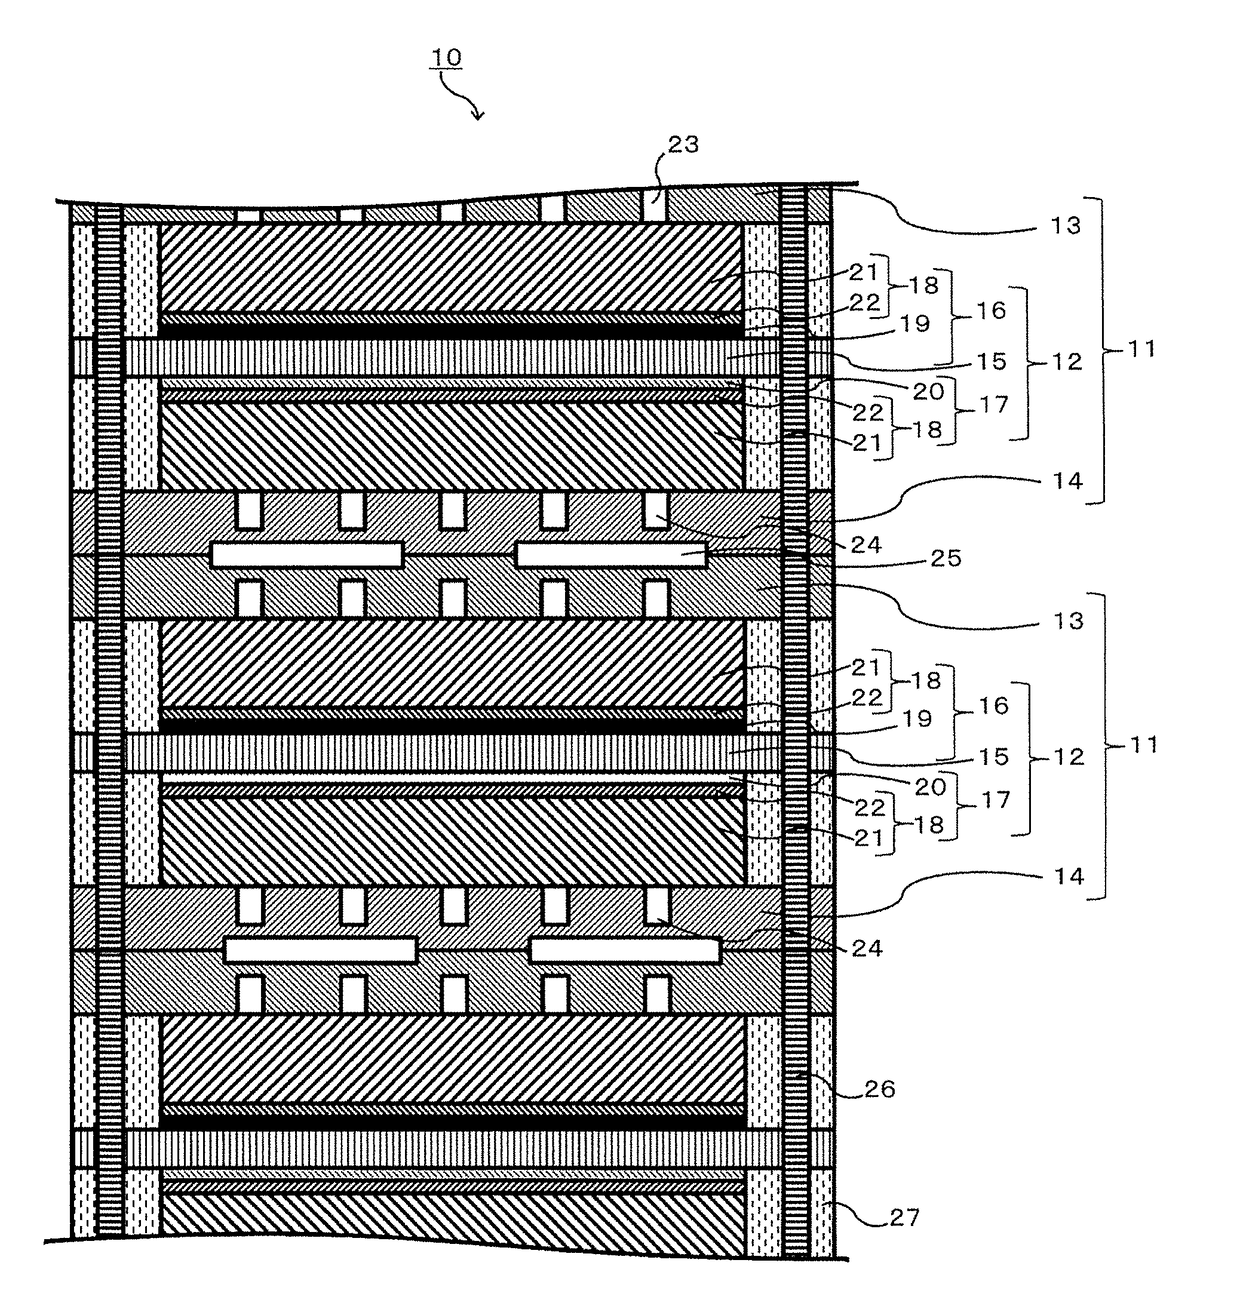 Cell, fuel cell stack, fuel cell system, and membrane electrode assembly